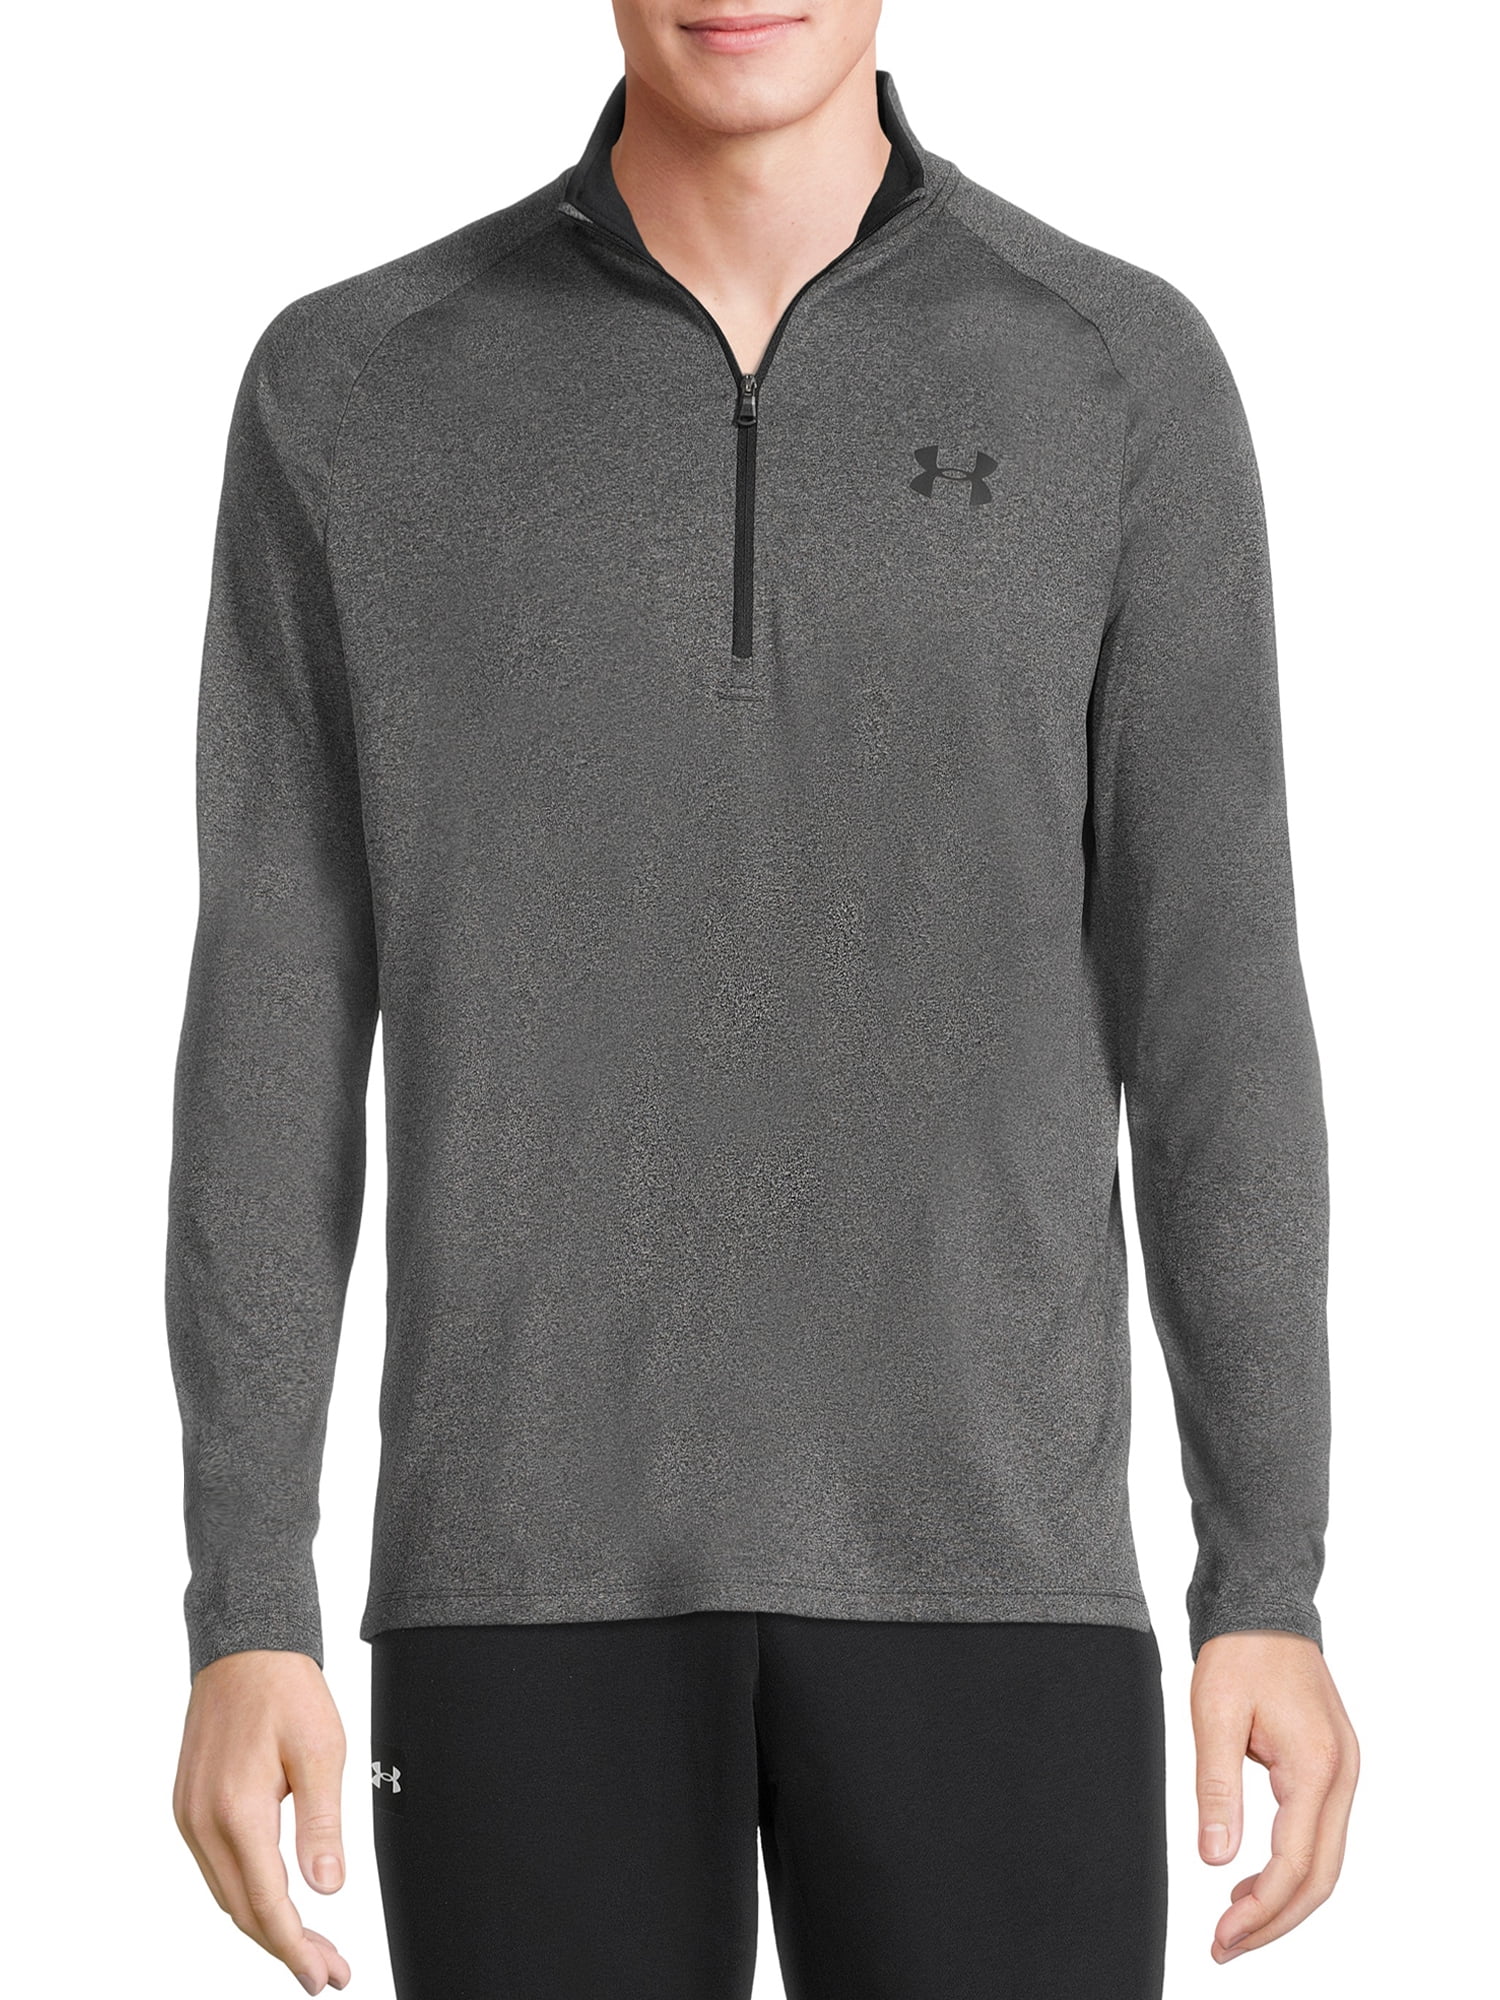 Under Armour and Men's UA Tech Half Zip Pullover with Long Sleeves, Sizes up to 2XL - Walmart.com